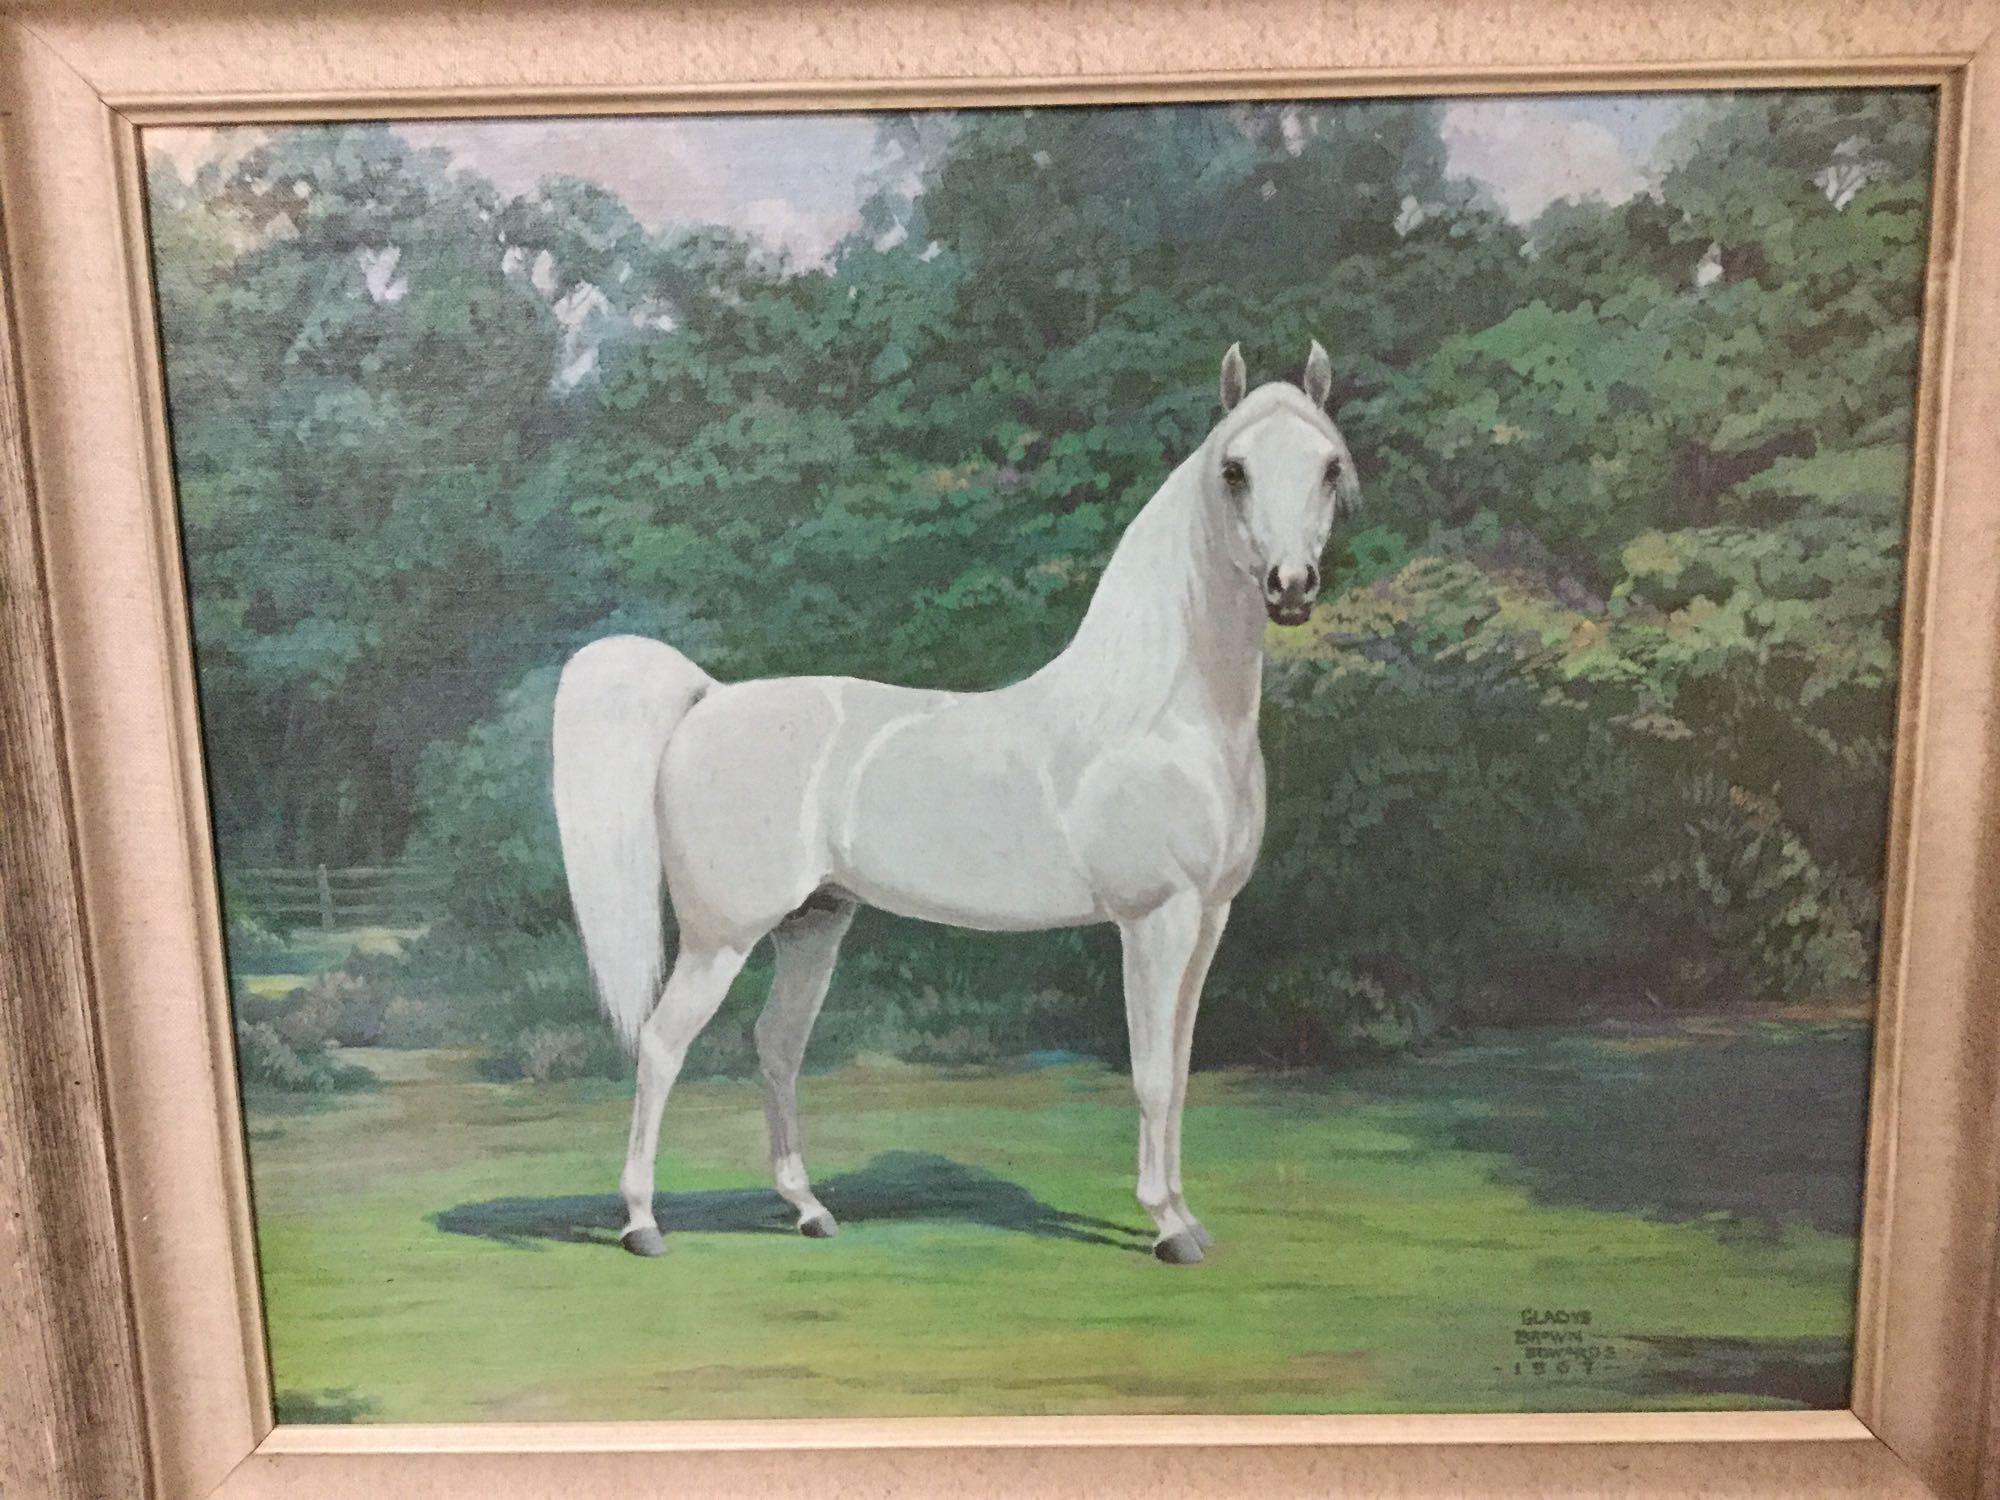 Framed original canvas painting of a white horse in a field signed Gladys Brown Edwards 1967